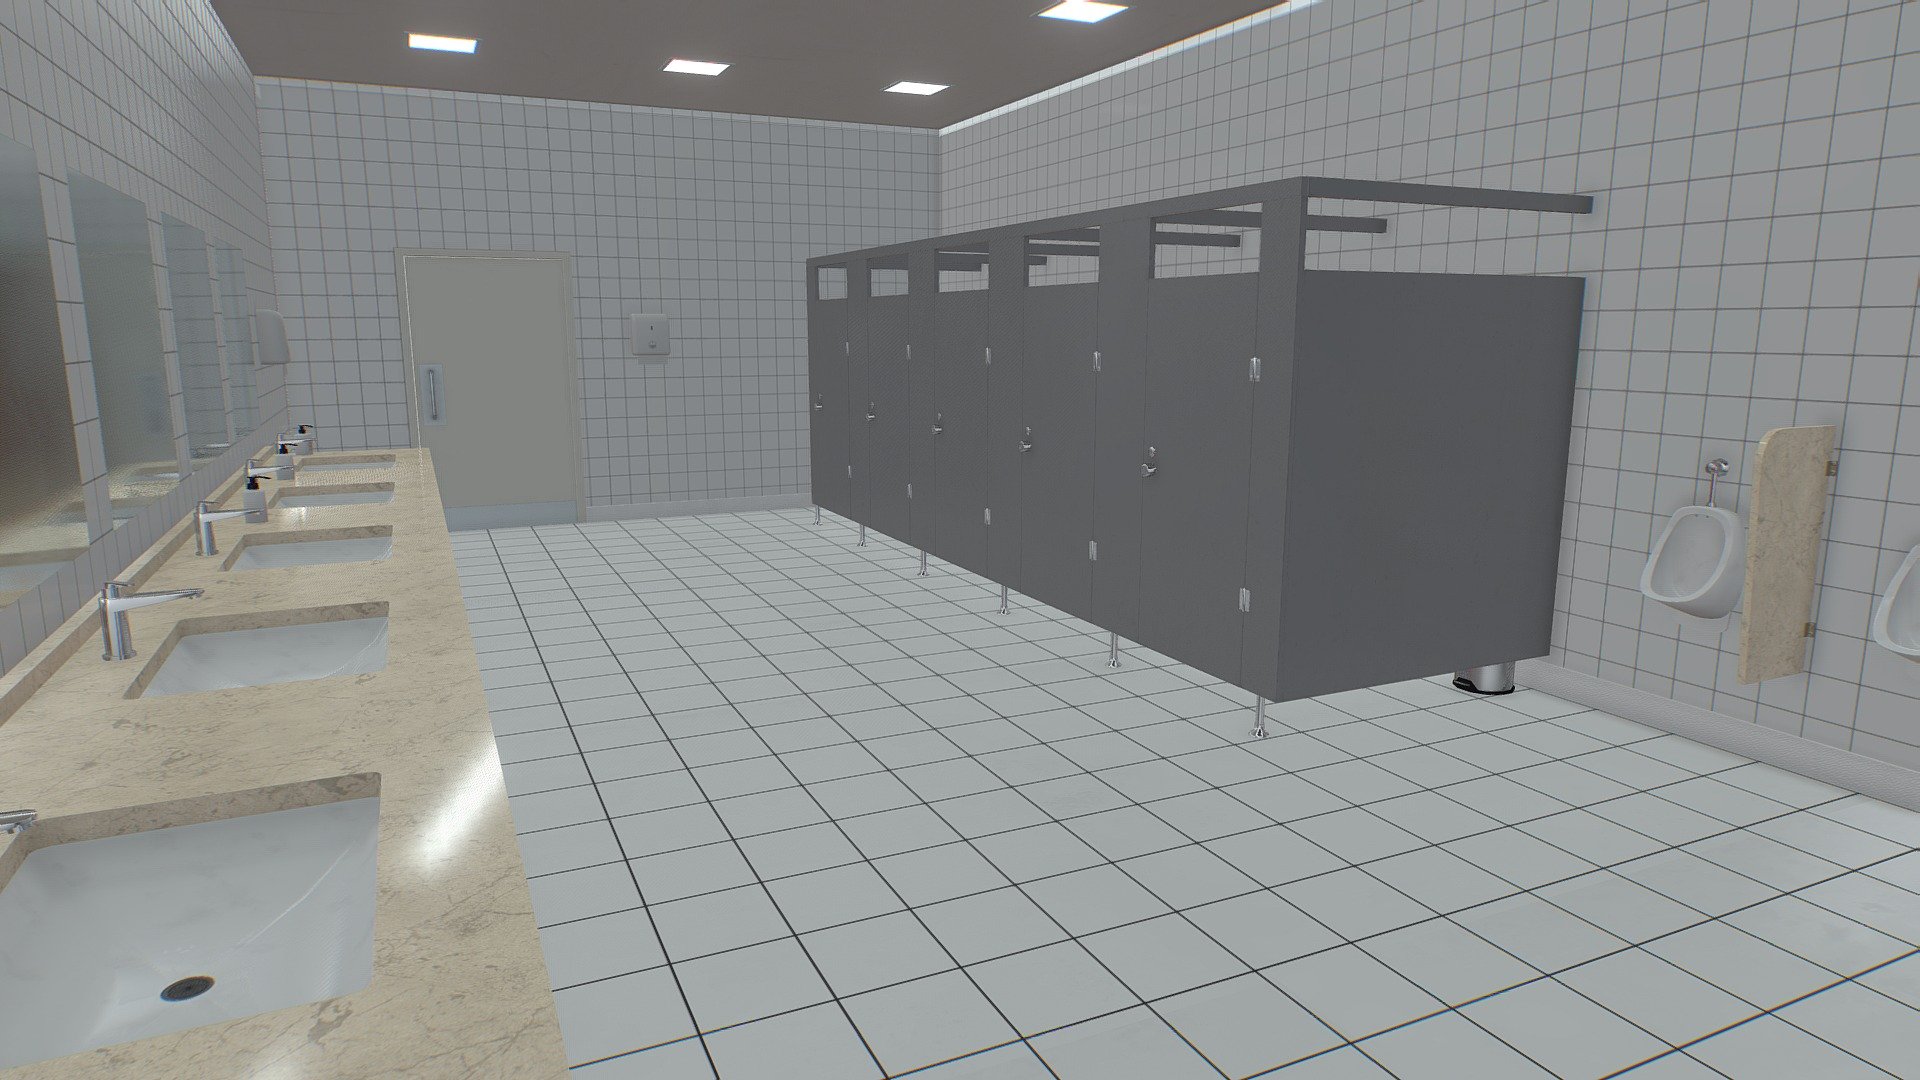 Features:




Low Poly

Optmized

Game ready

Separated and nomed parts

Easy to use and modify

Create multiple possibilities with modular parts

All formats tested and working

Textures included and materials applied

Textures PBR MetalRough and SpecGloss 4096x4096
 - Restroom Props - Buy Royalty Free 3D model by Elvair Lima (@elvair) 3d model